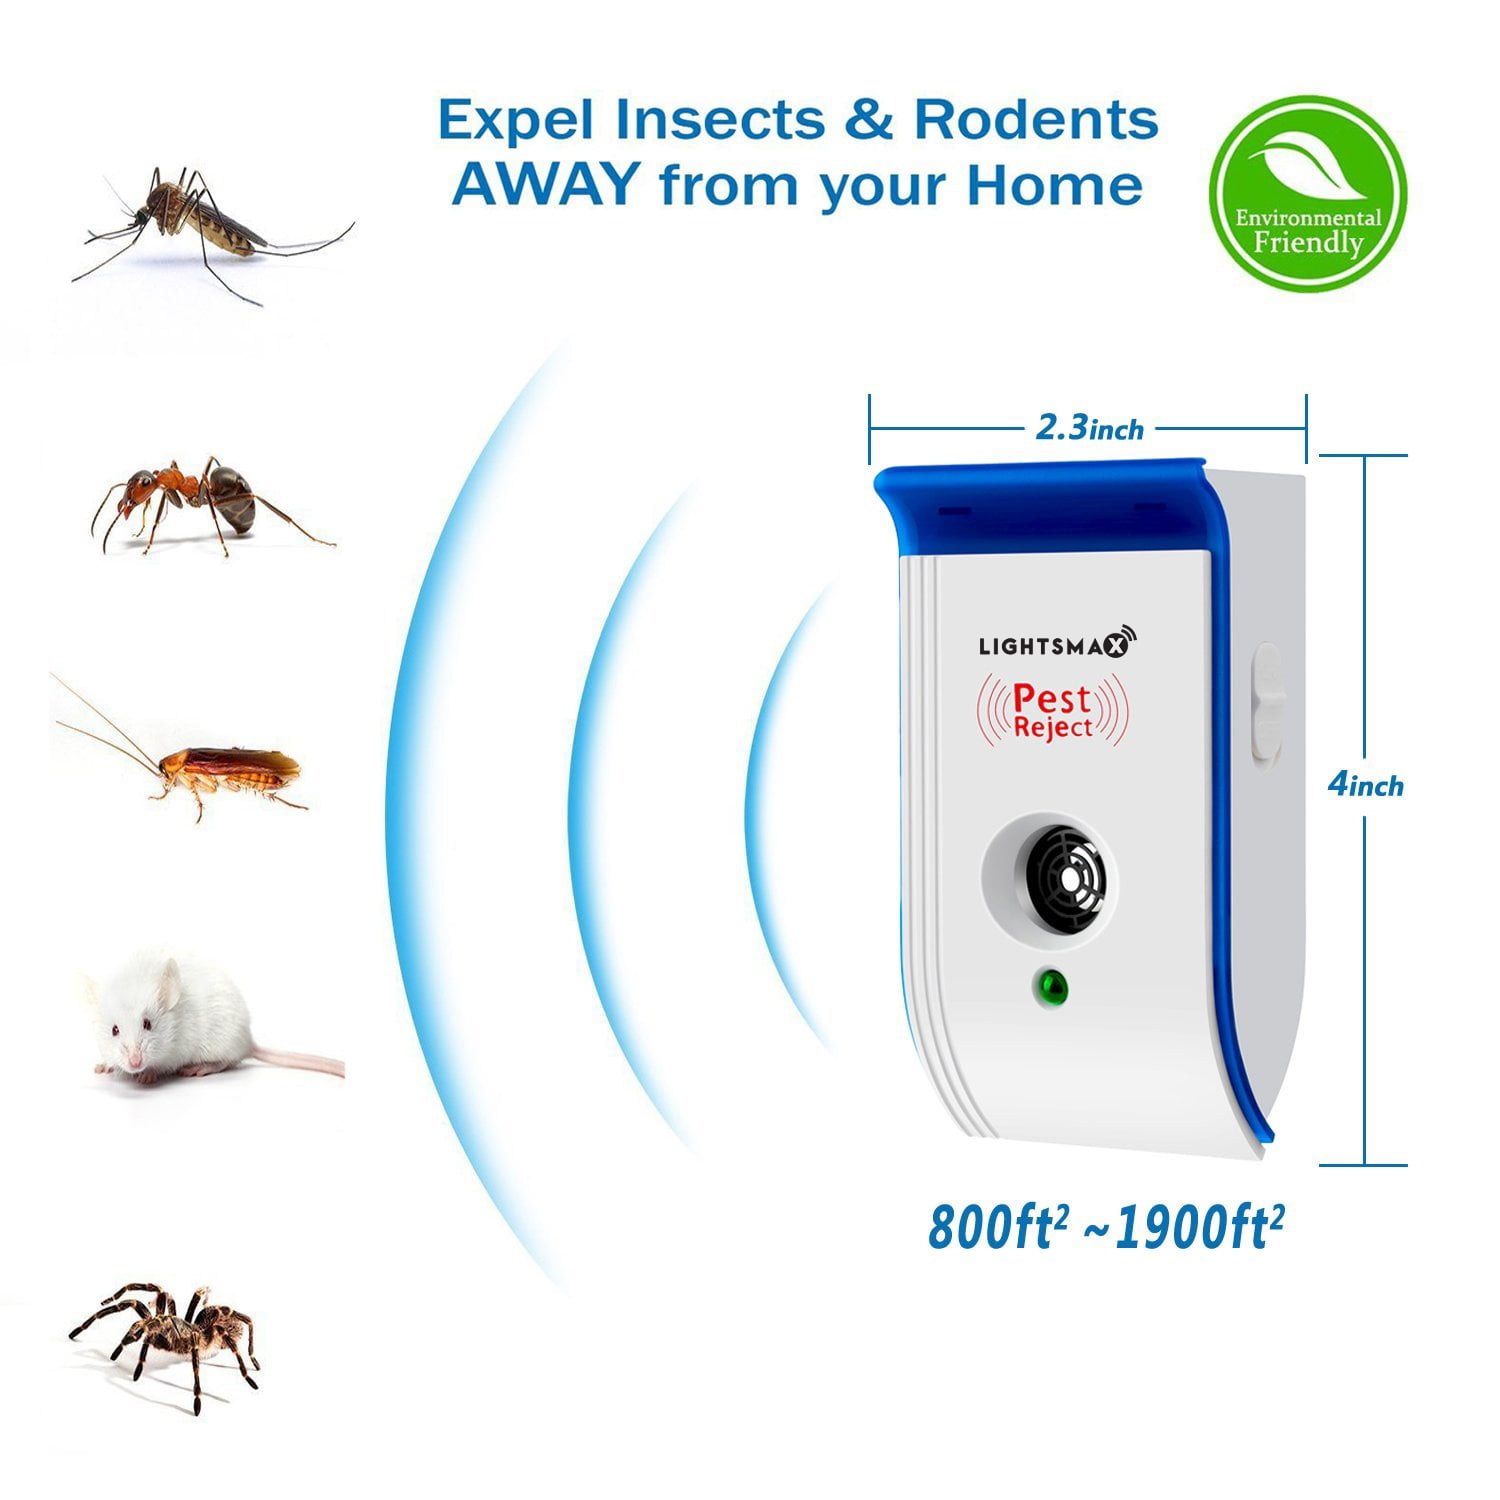 GTWCK Ultrasonic Pest Repeller Mouse Portable Outdoor USB Powered Mosquito Repellent for Cockroach Mosquito,Bed Bugs and Fleas Ant Spider